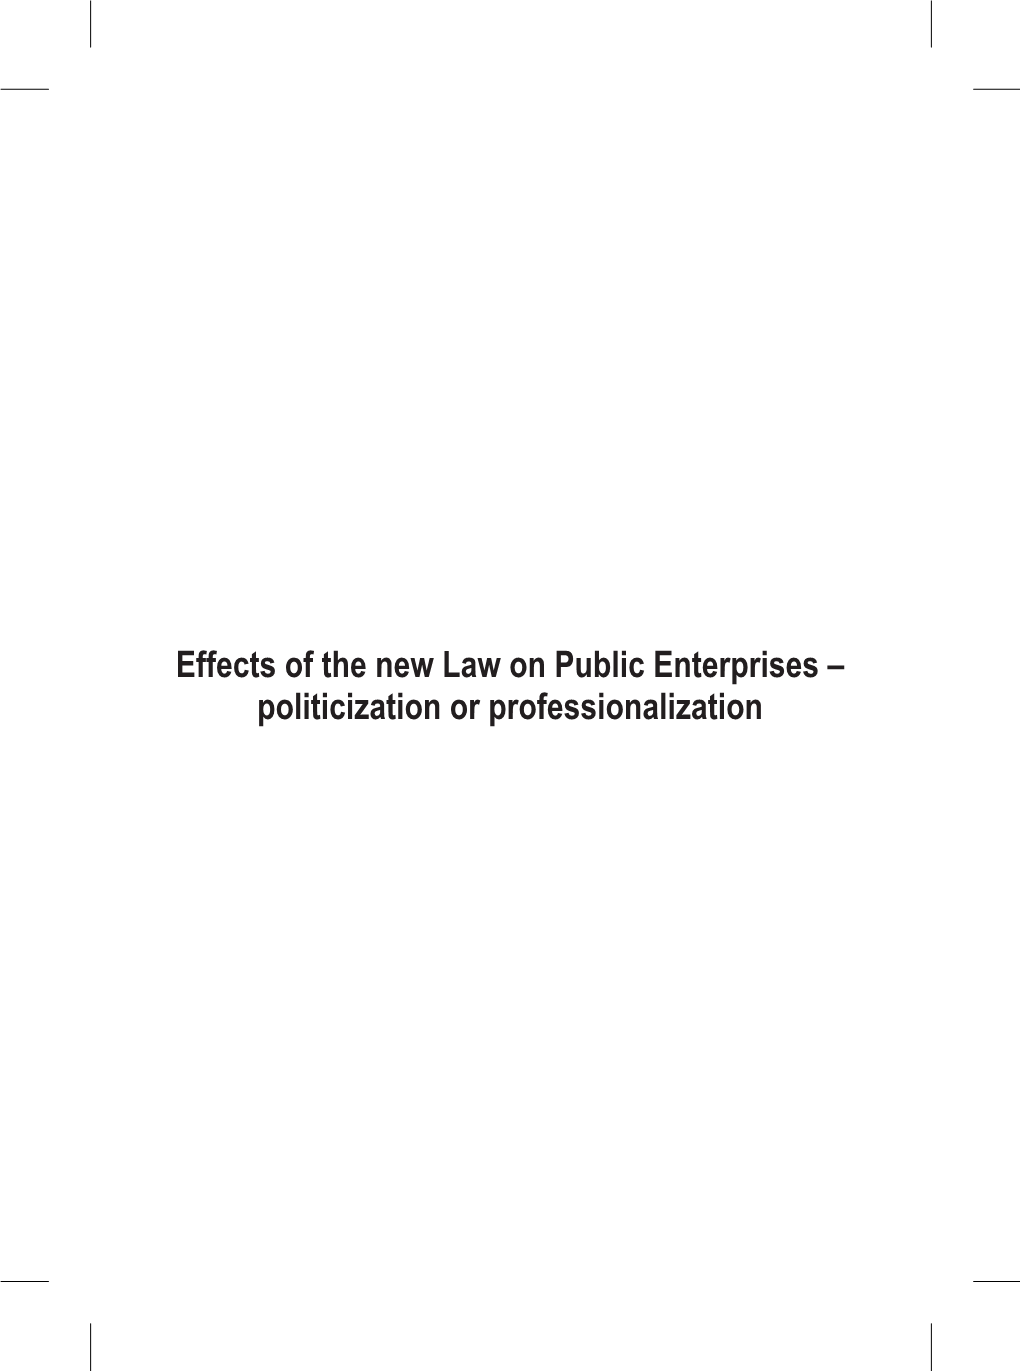 Effects of the New Law on Public Enterprises–Politicization Or